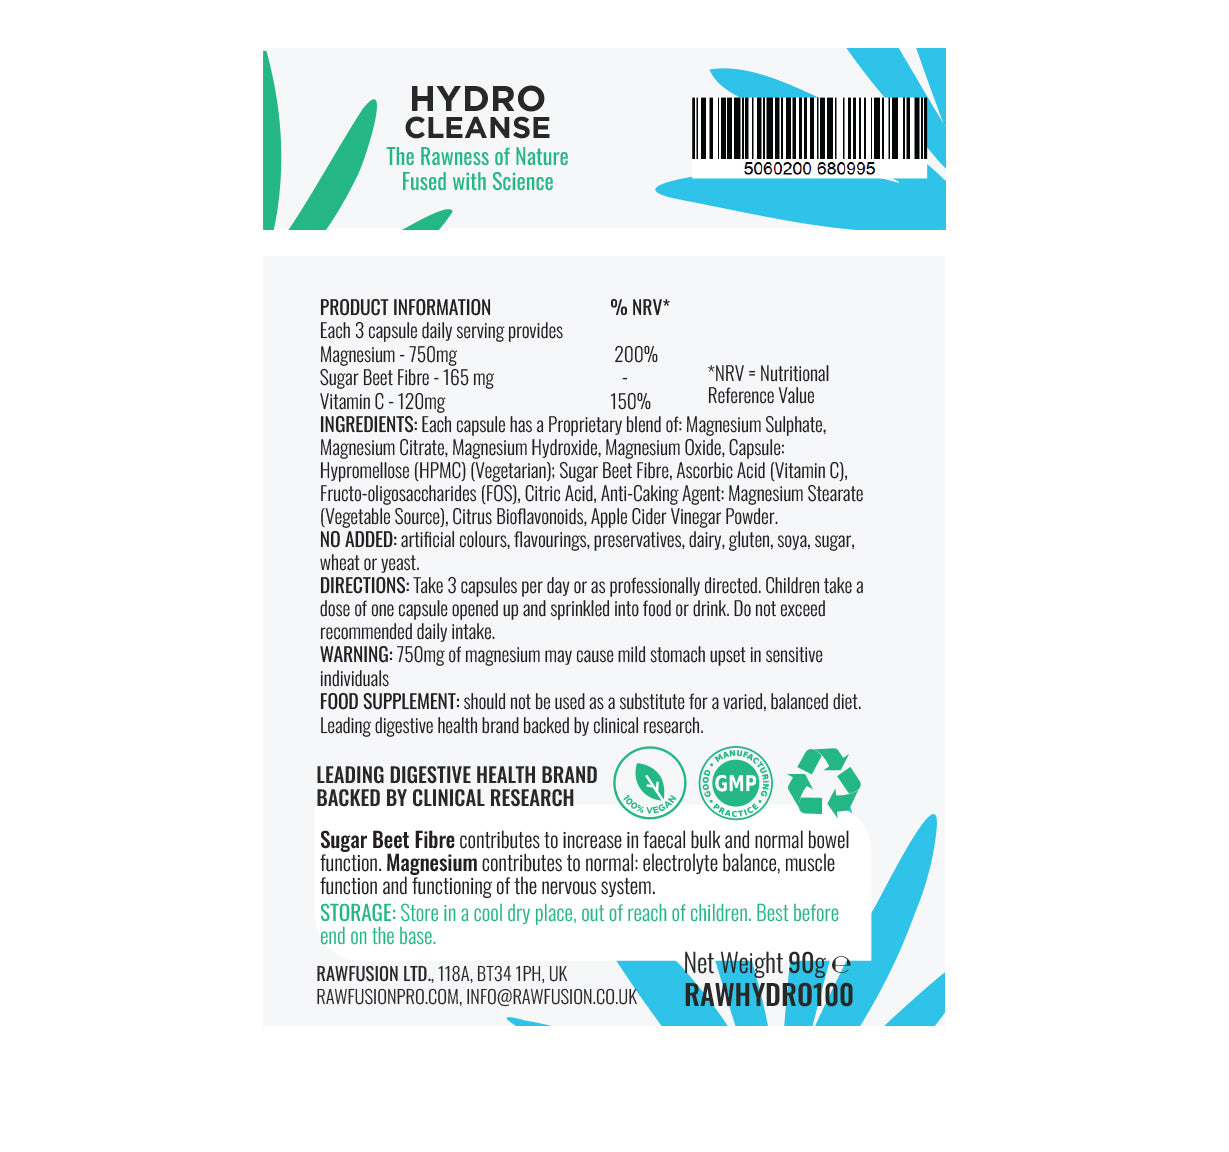 HYDRO Cleanse